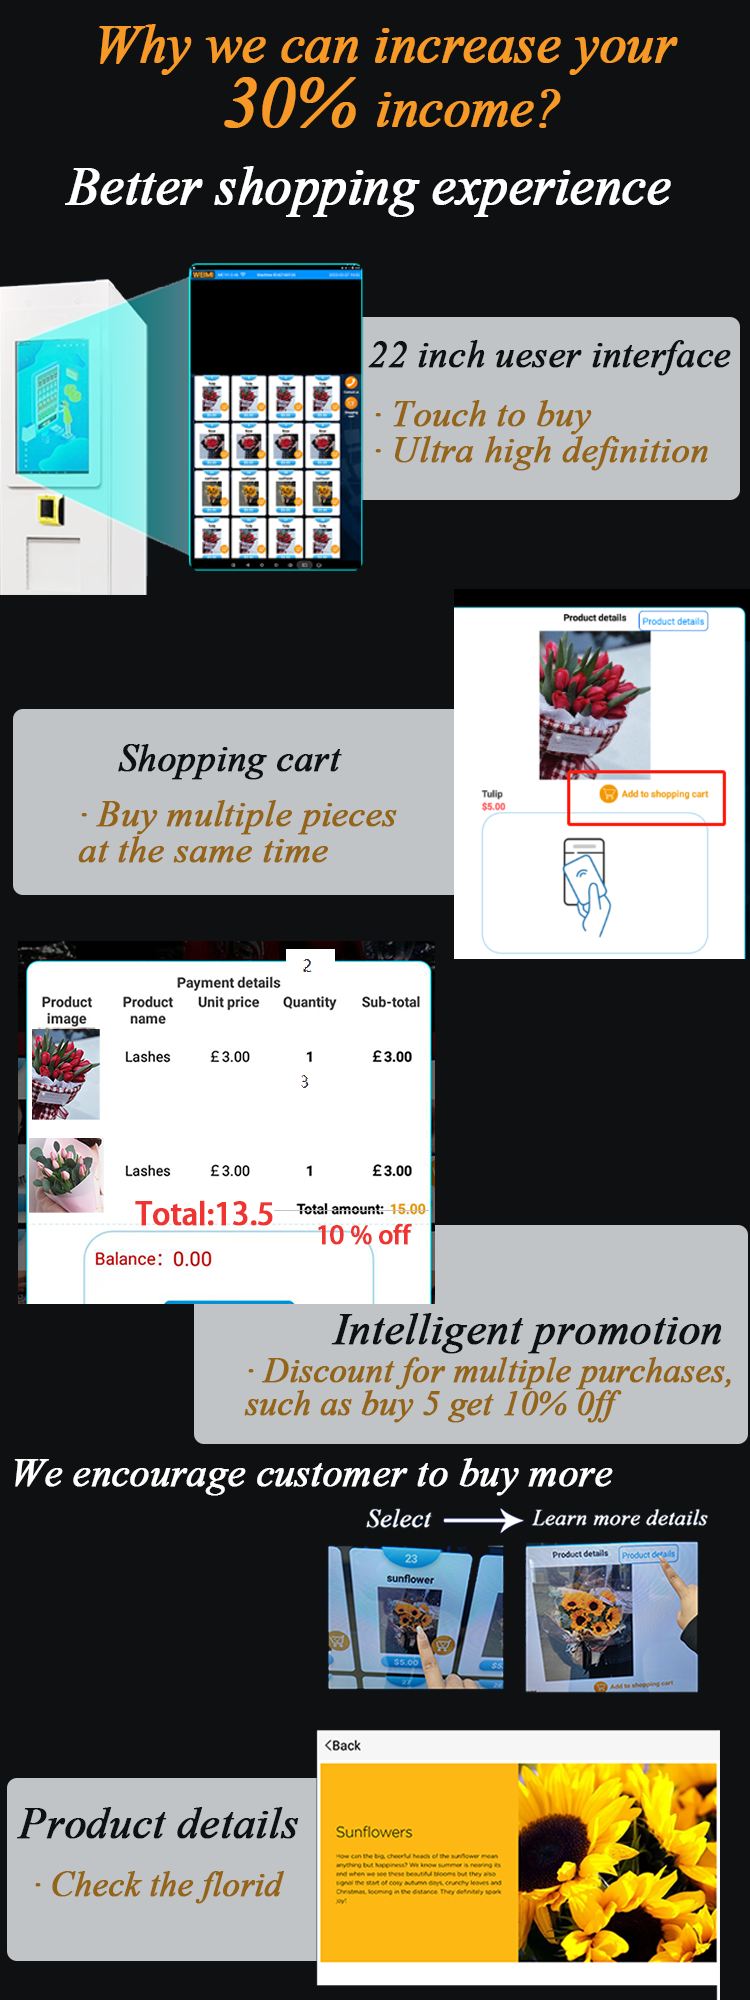 Why choose micron smart flower vending machine? We can increase your 30% income! our machine is intelligent and offer customer better shopping experience